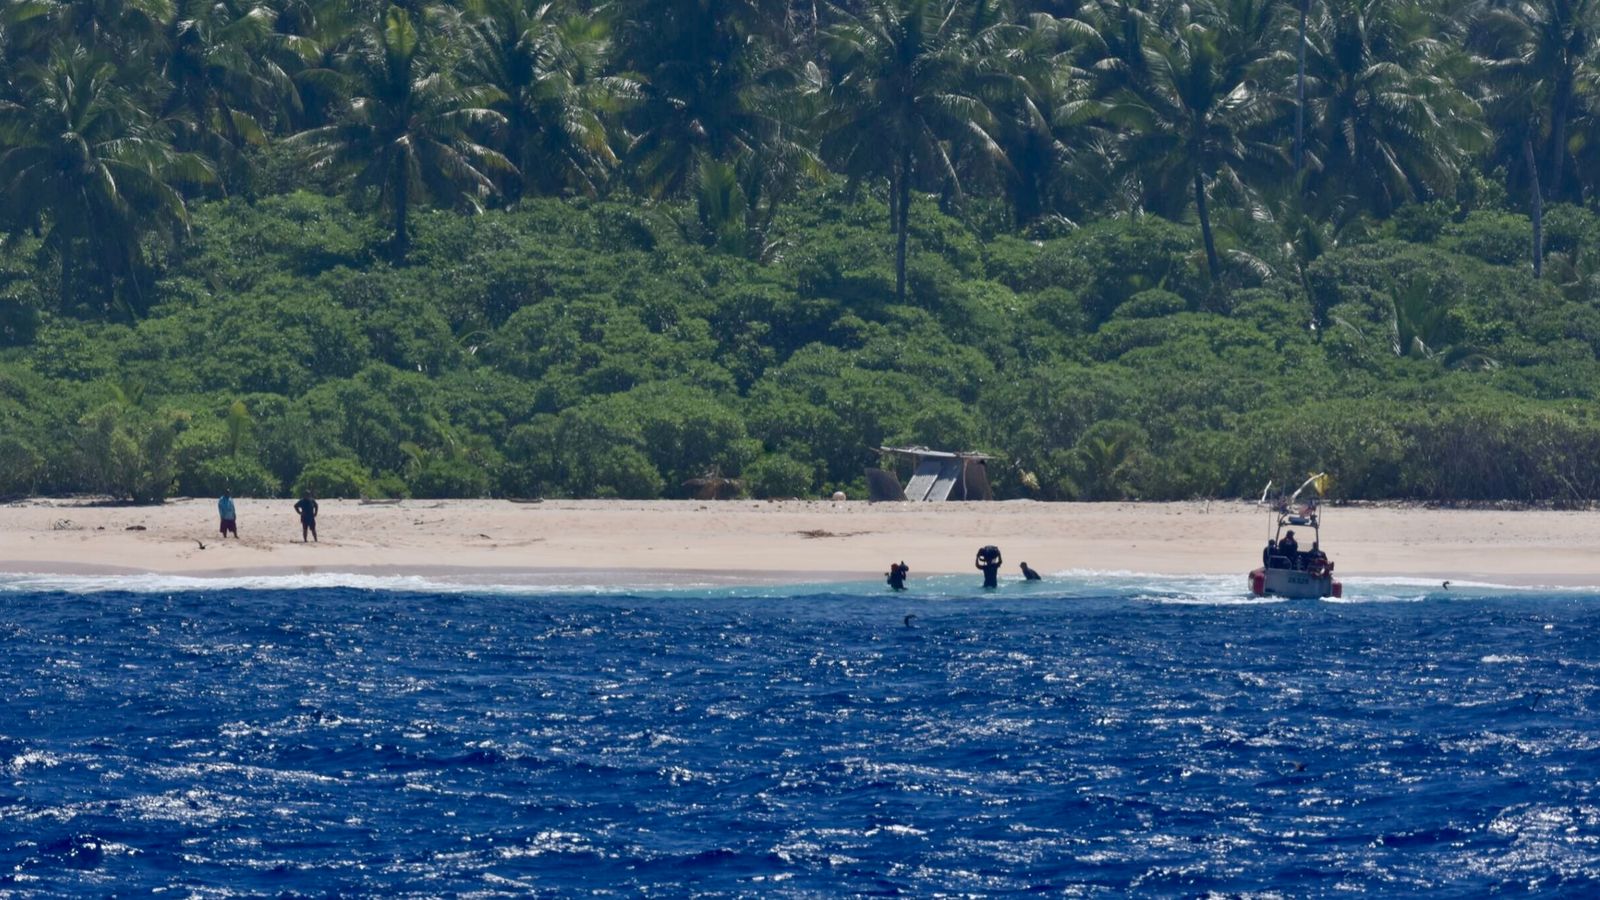 stranded sailors rescued from remote island after spelling 'help' with palm tree leaves